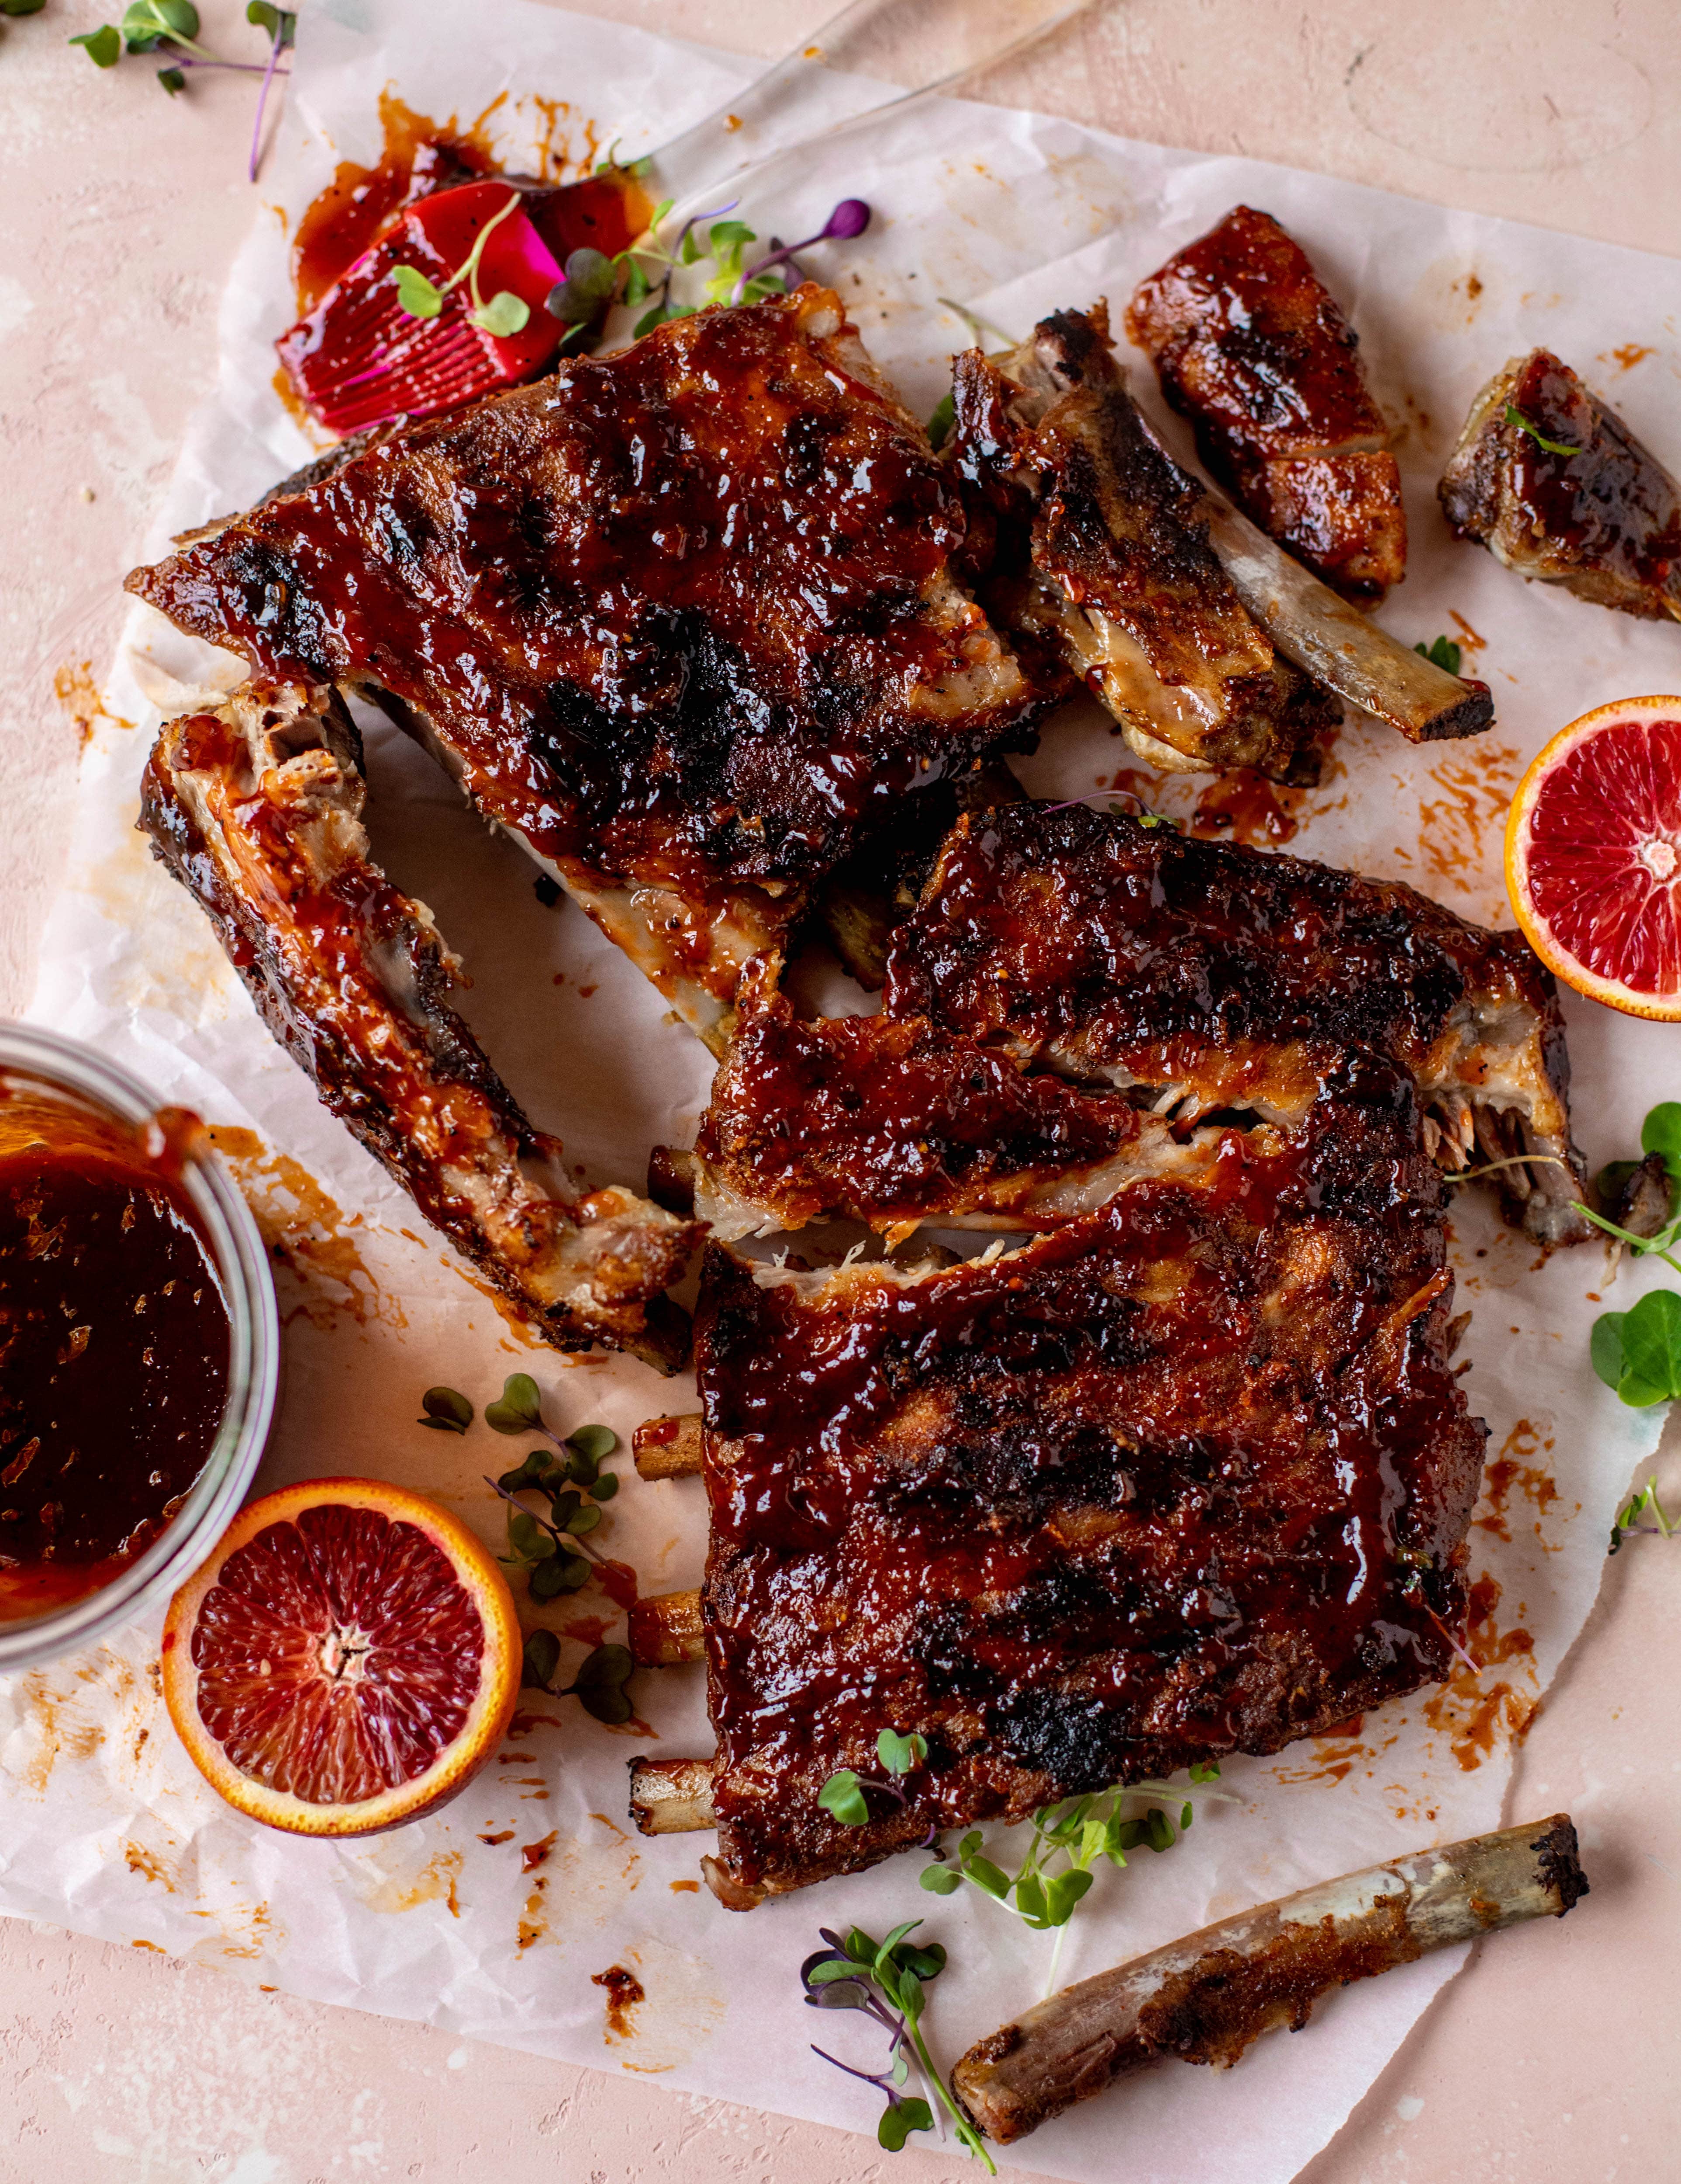 These blood orange BBQ ribs are smoky, sweet, sticky and oh-so good. Serve alongside an avocado butter greens salad for the ultimate combo! 